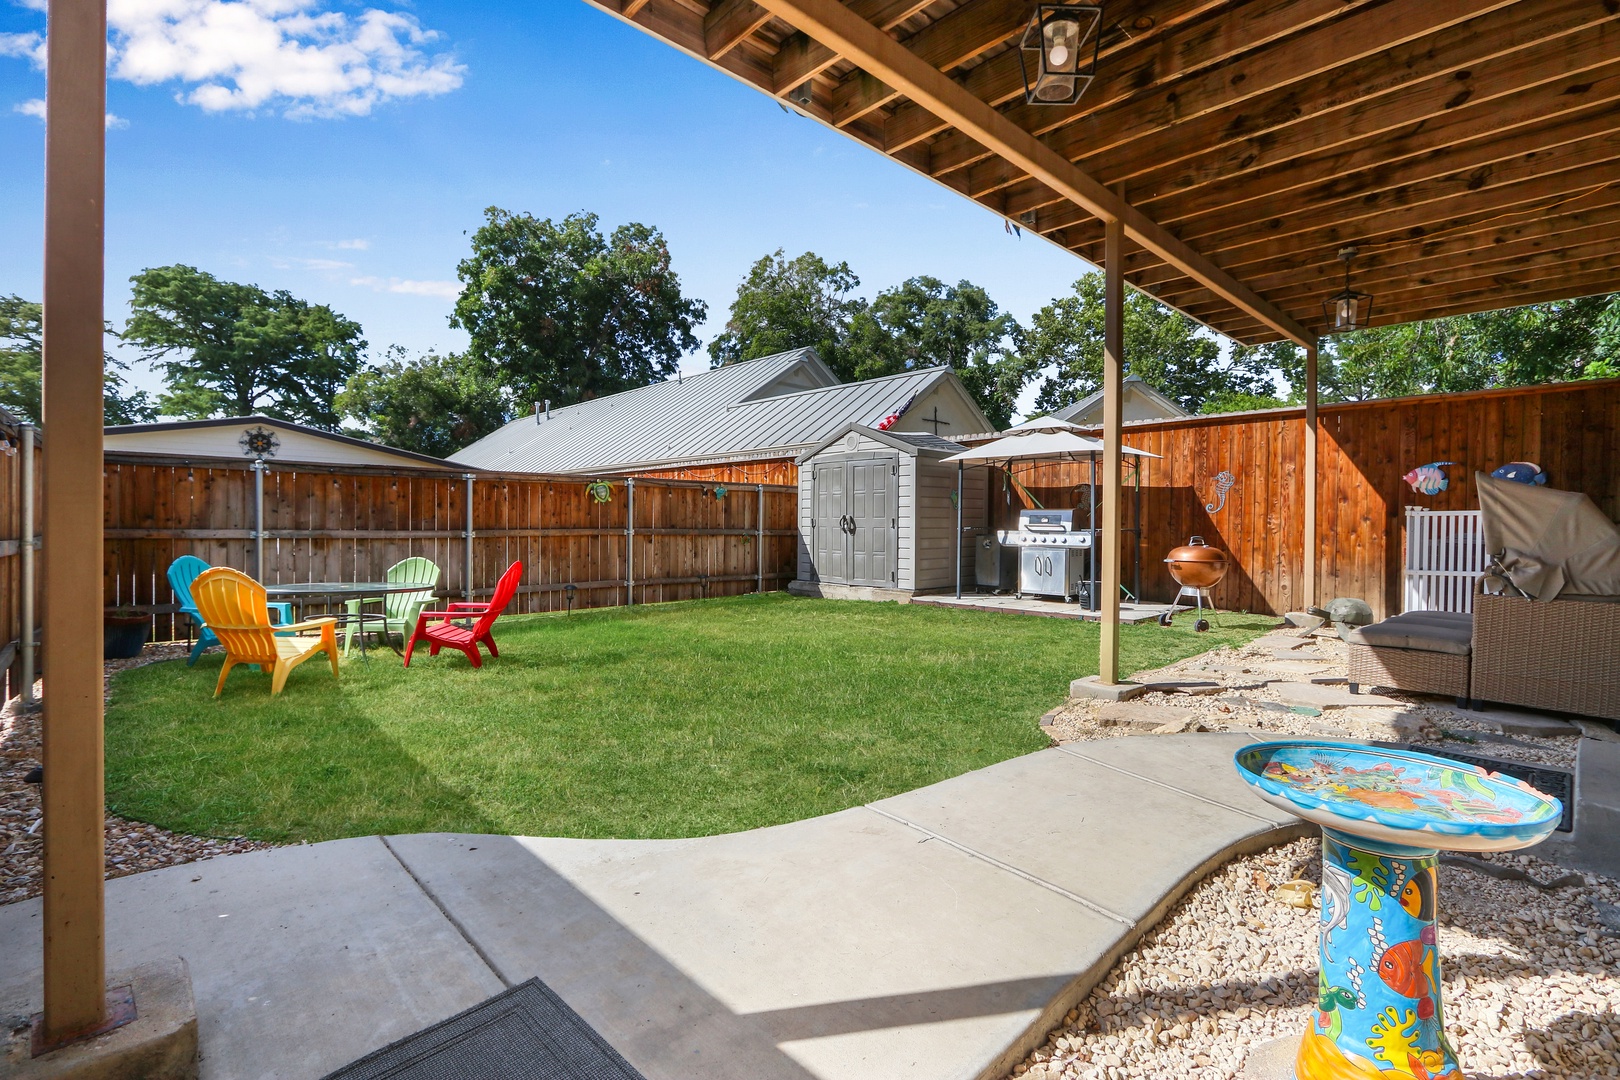 The whole family will love relaxing, dining, & playing in the fenced back yard